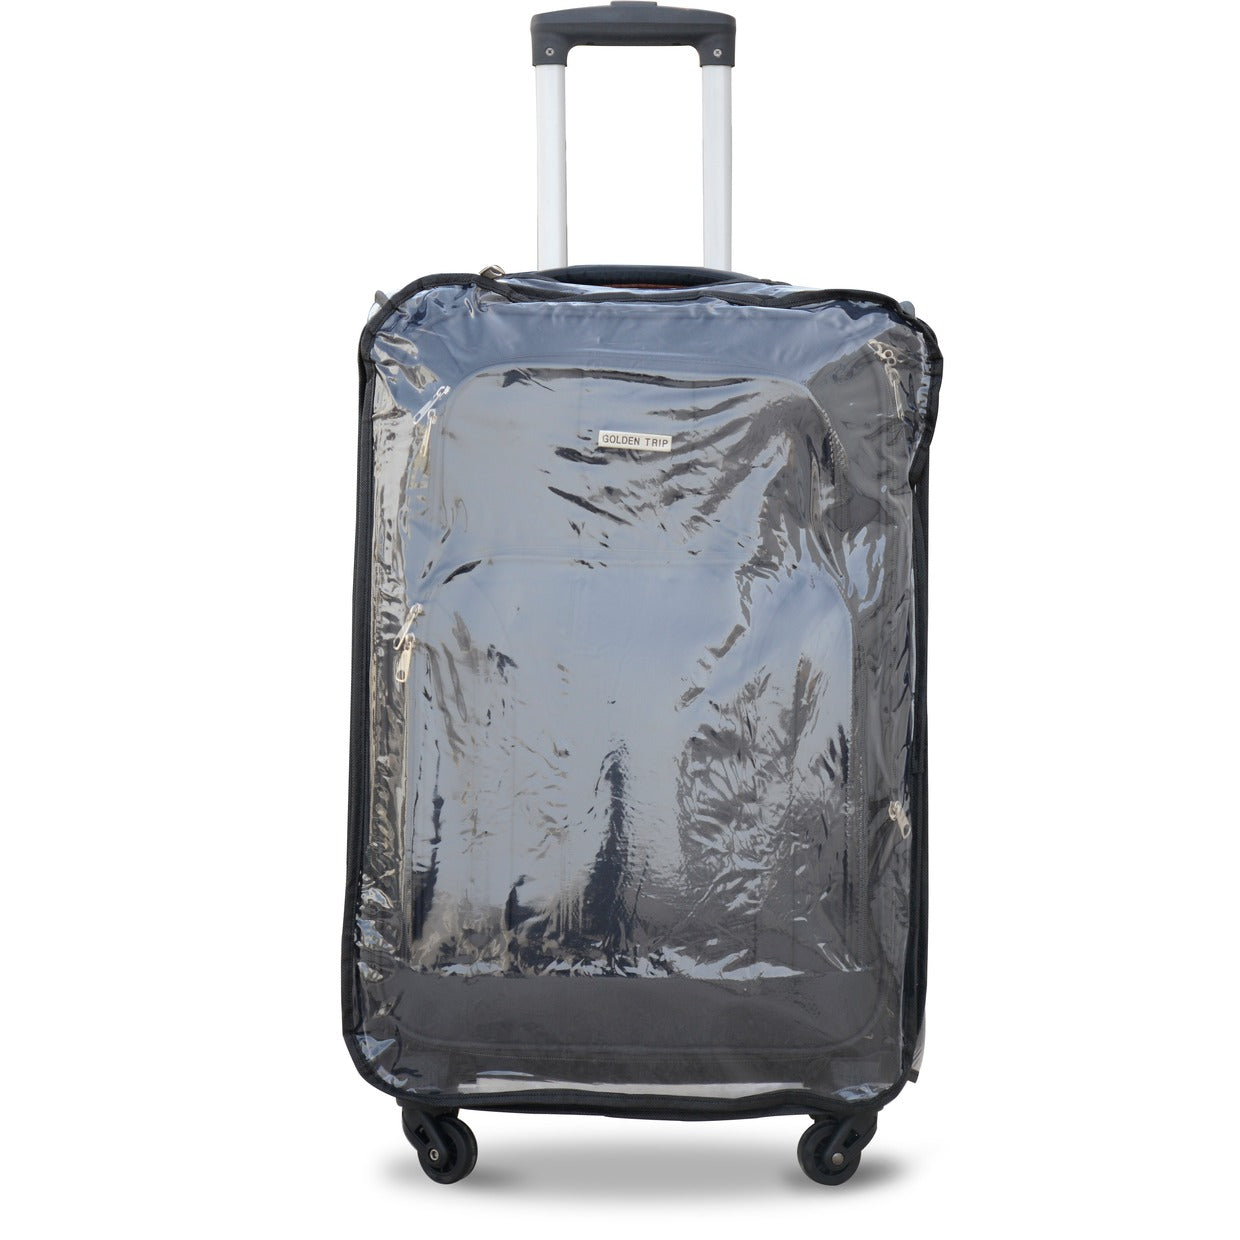 Soft Material 4 Wheel Premium Luggage Bag with Full Cover C1